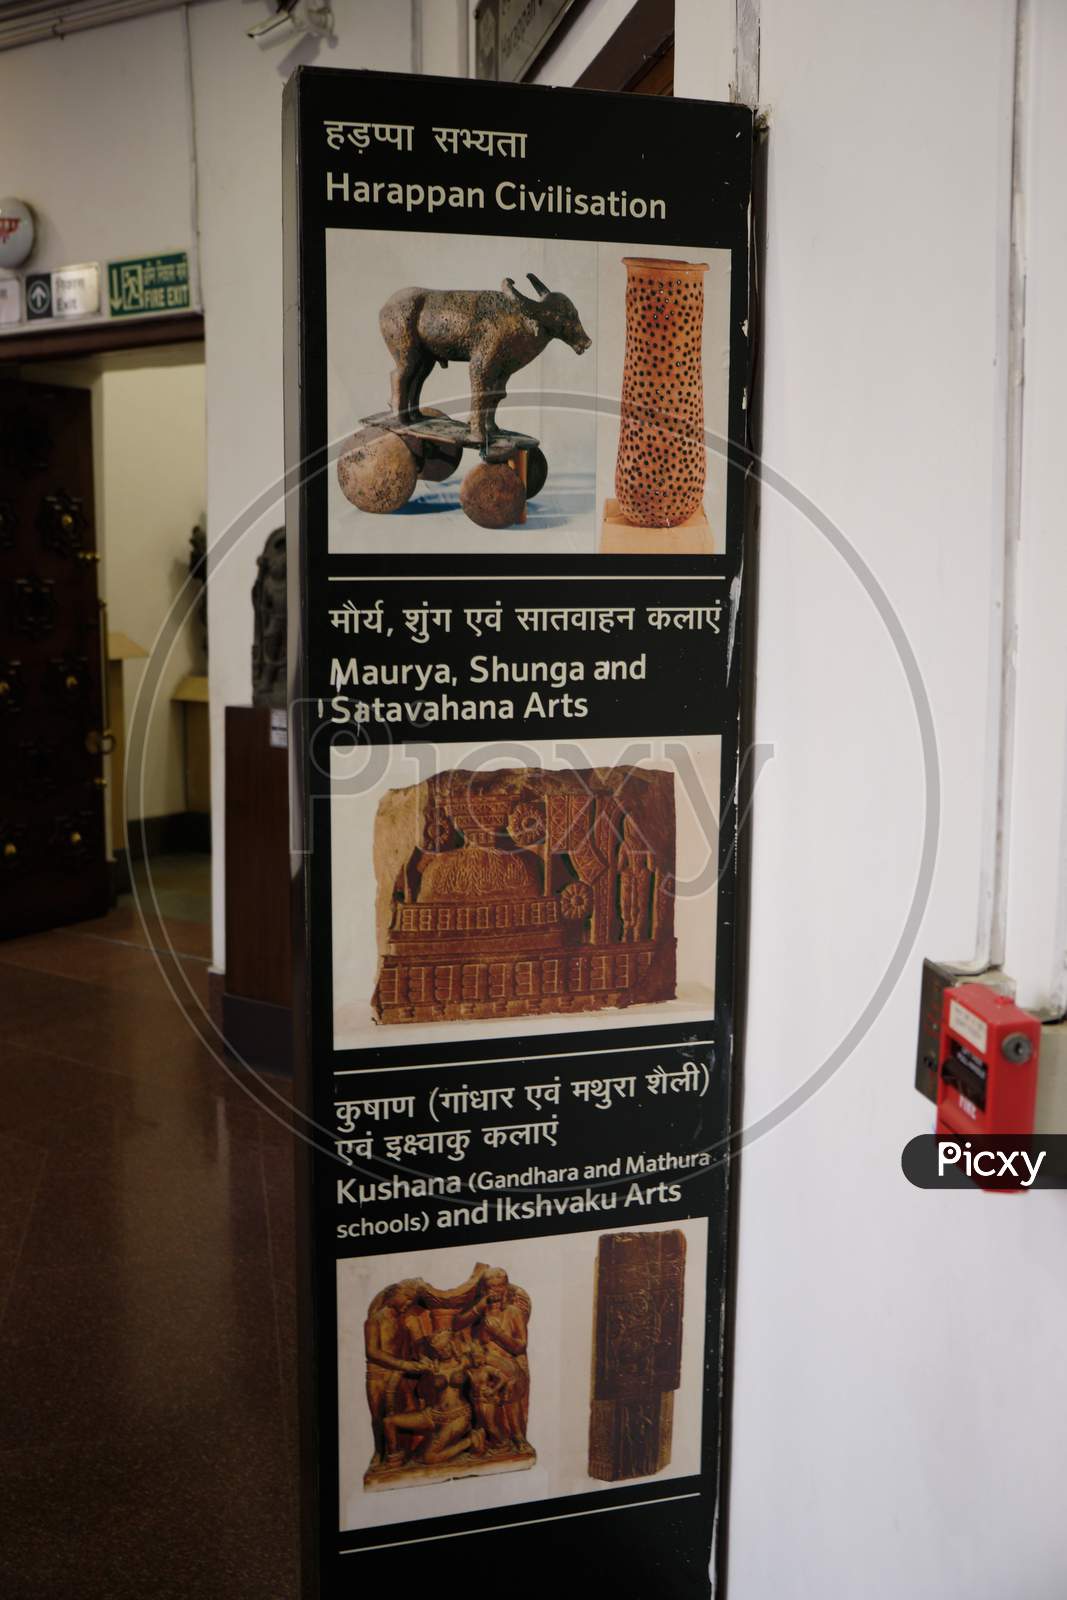 Exhibition Of Ancient Indian Civilizations In The National Museum Of India In New Delhi Which Houses Collection Of Artifacts Of 5,000 Years Of Indian Civilization, Culture And History